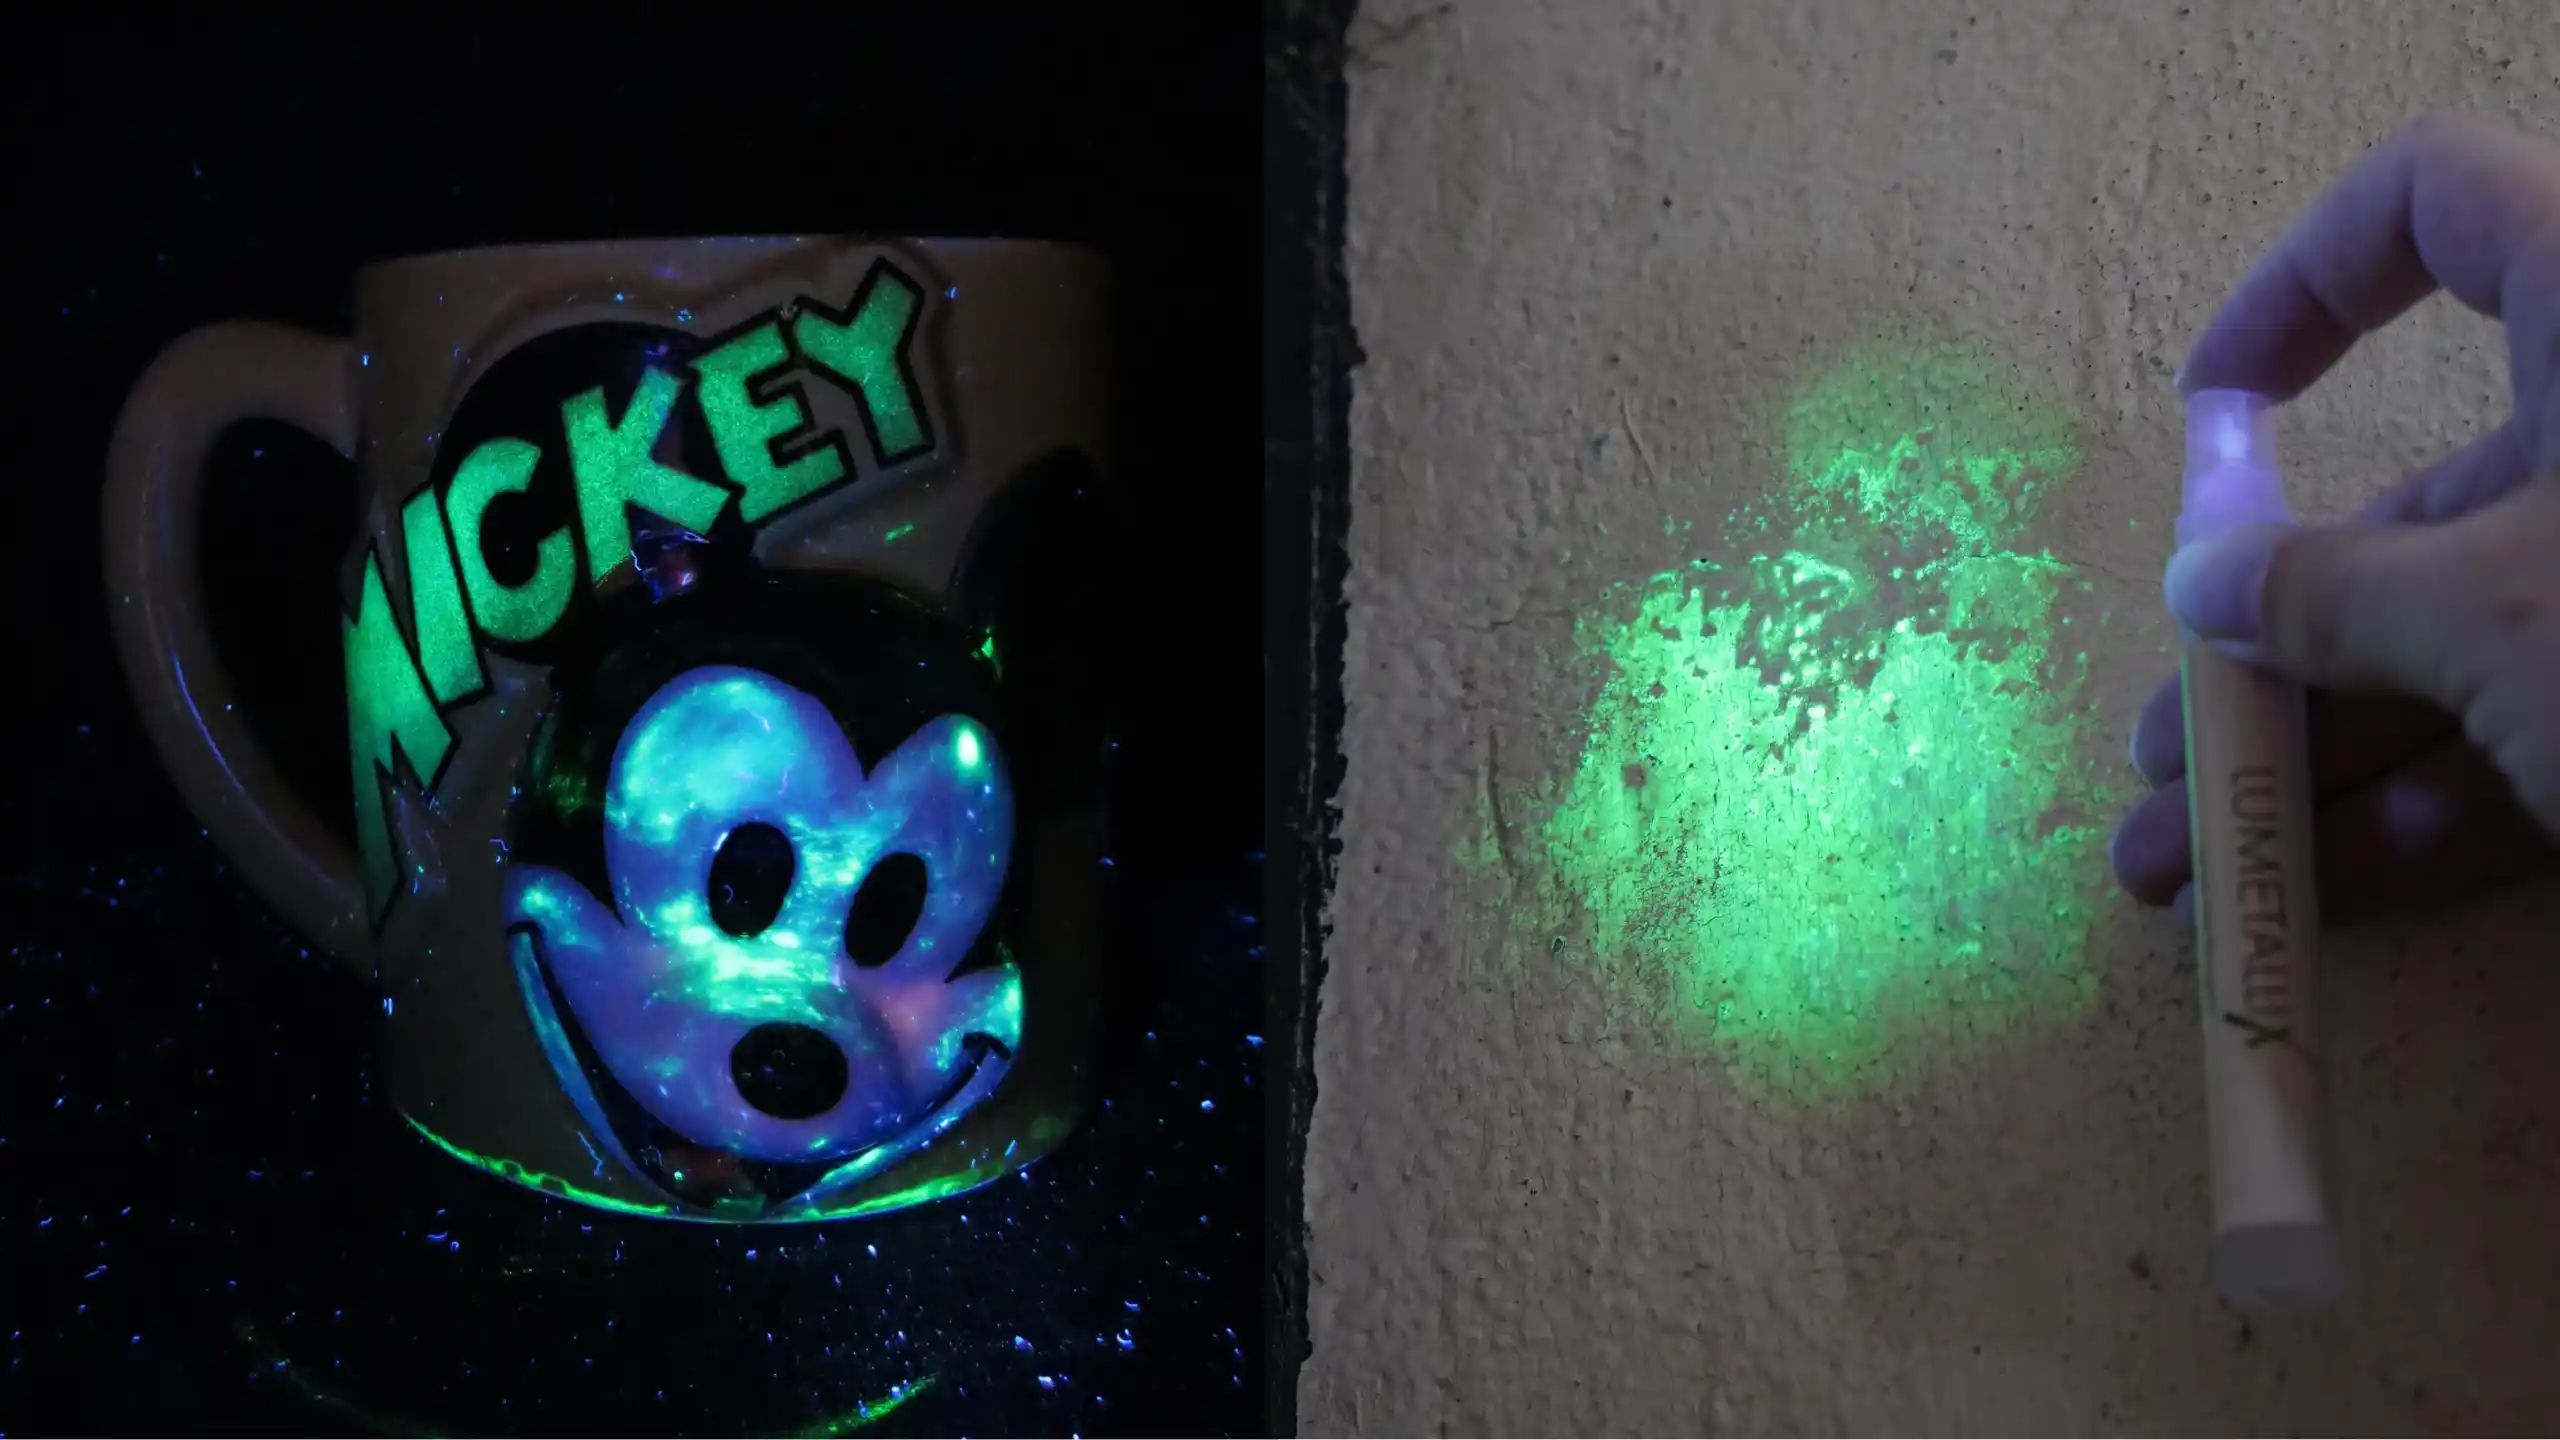 Deteriorating lead paint makes a Mickey Mouse mug and a wall light up green